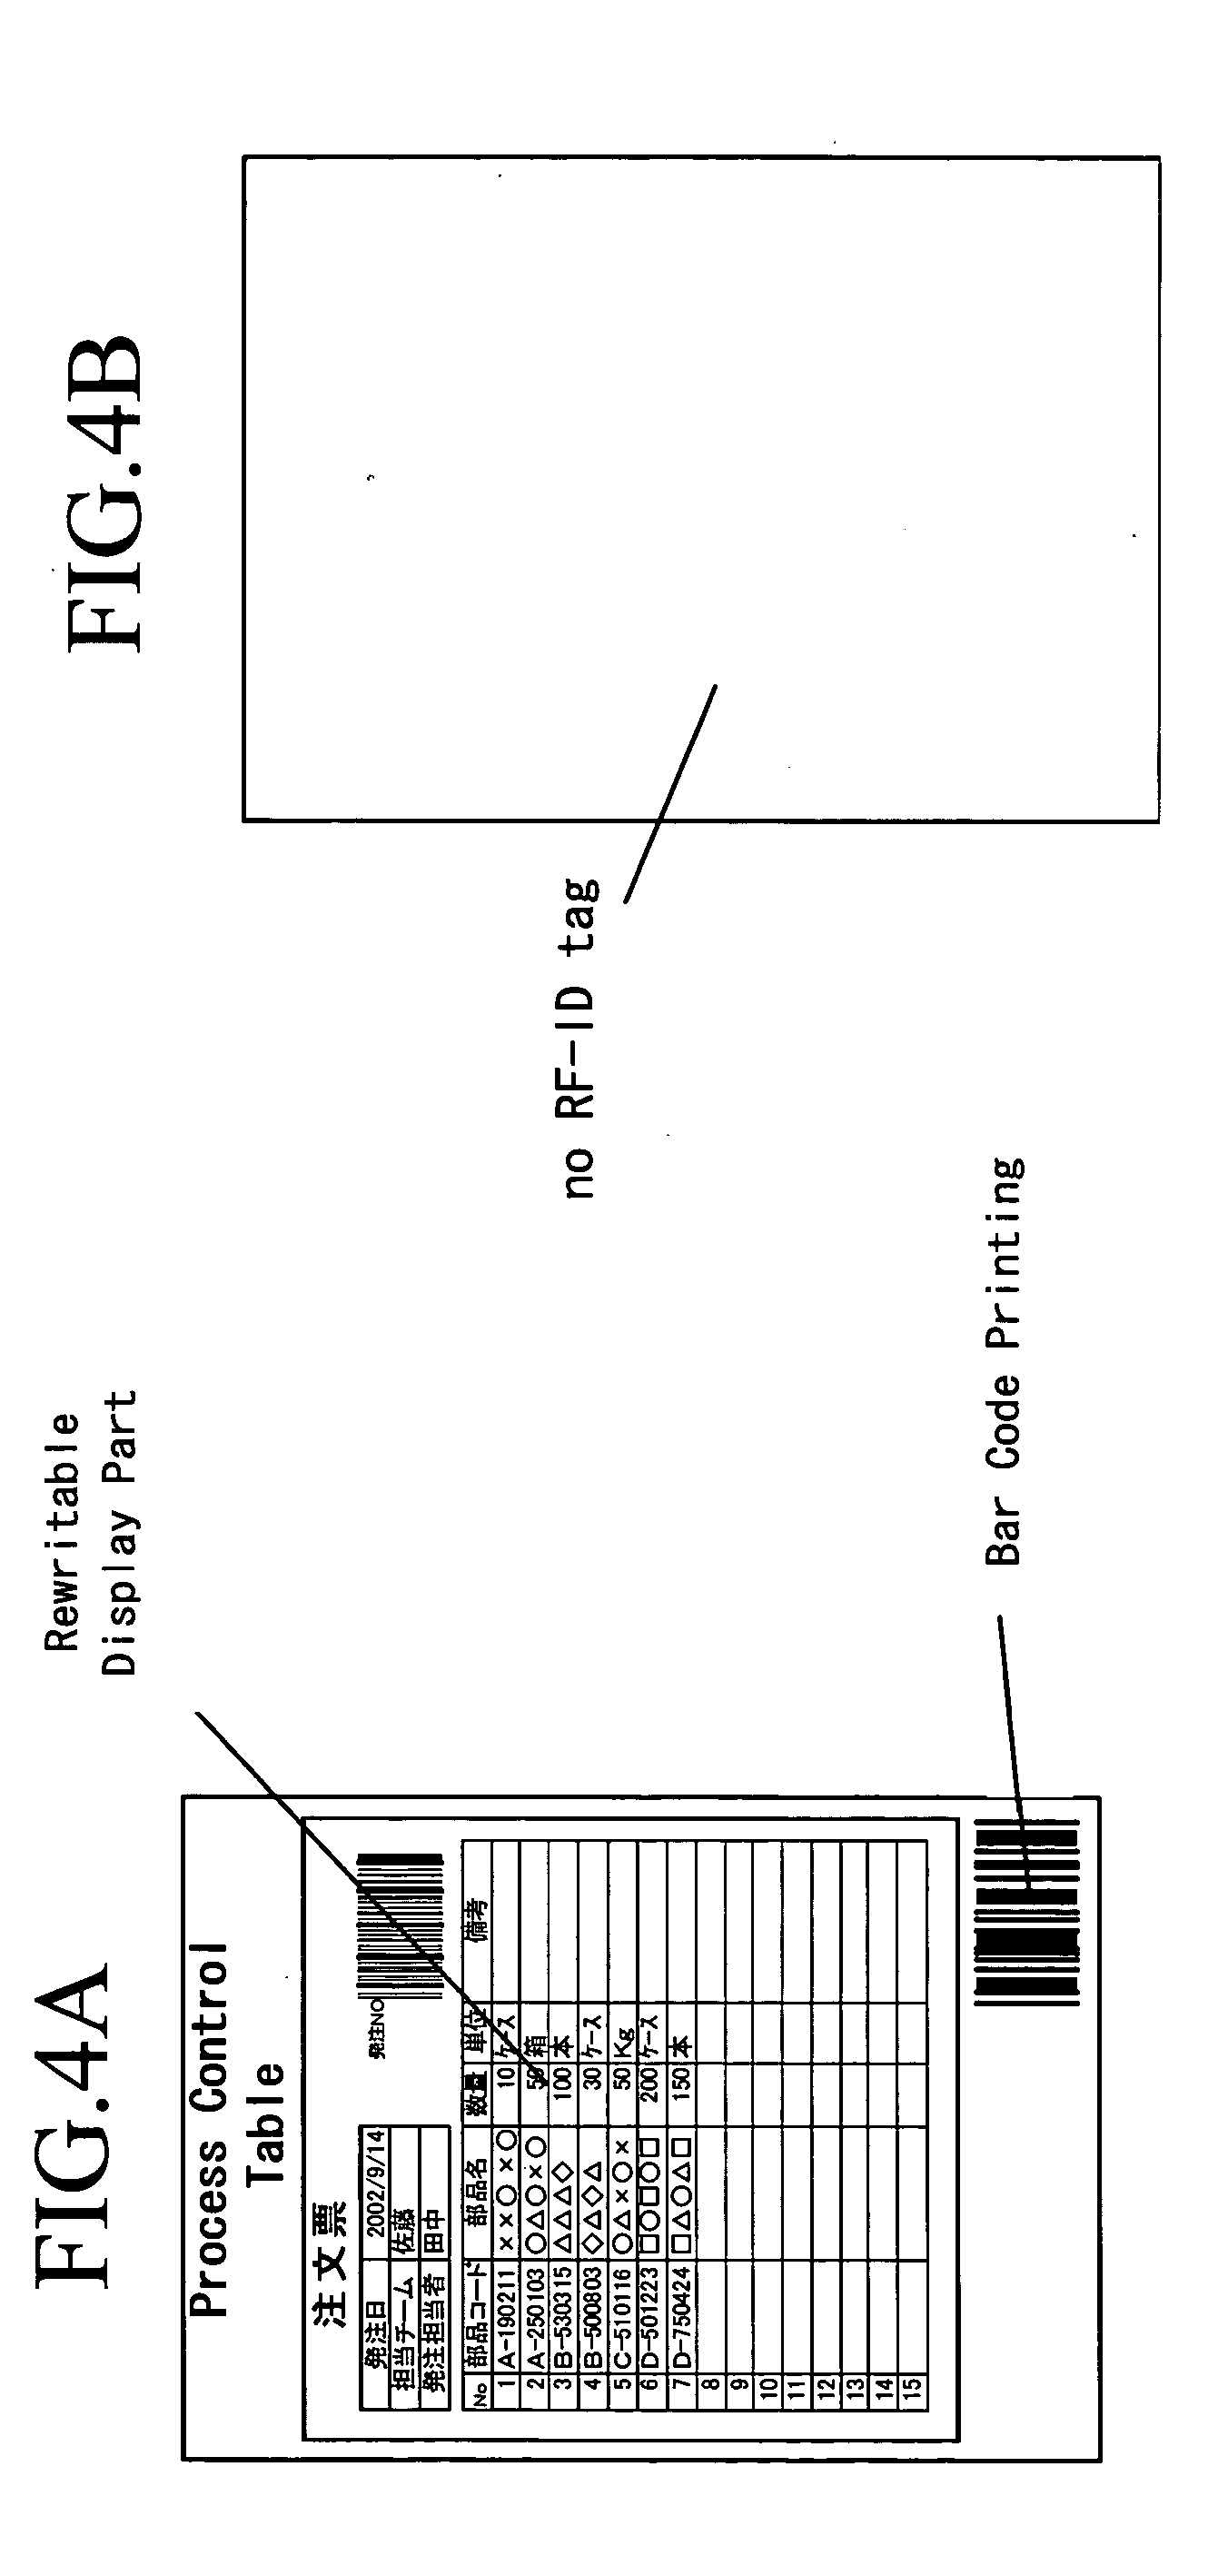 Reversible thermosensitive recording medium, label and member, and, image processing apparatus and method